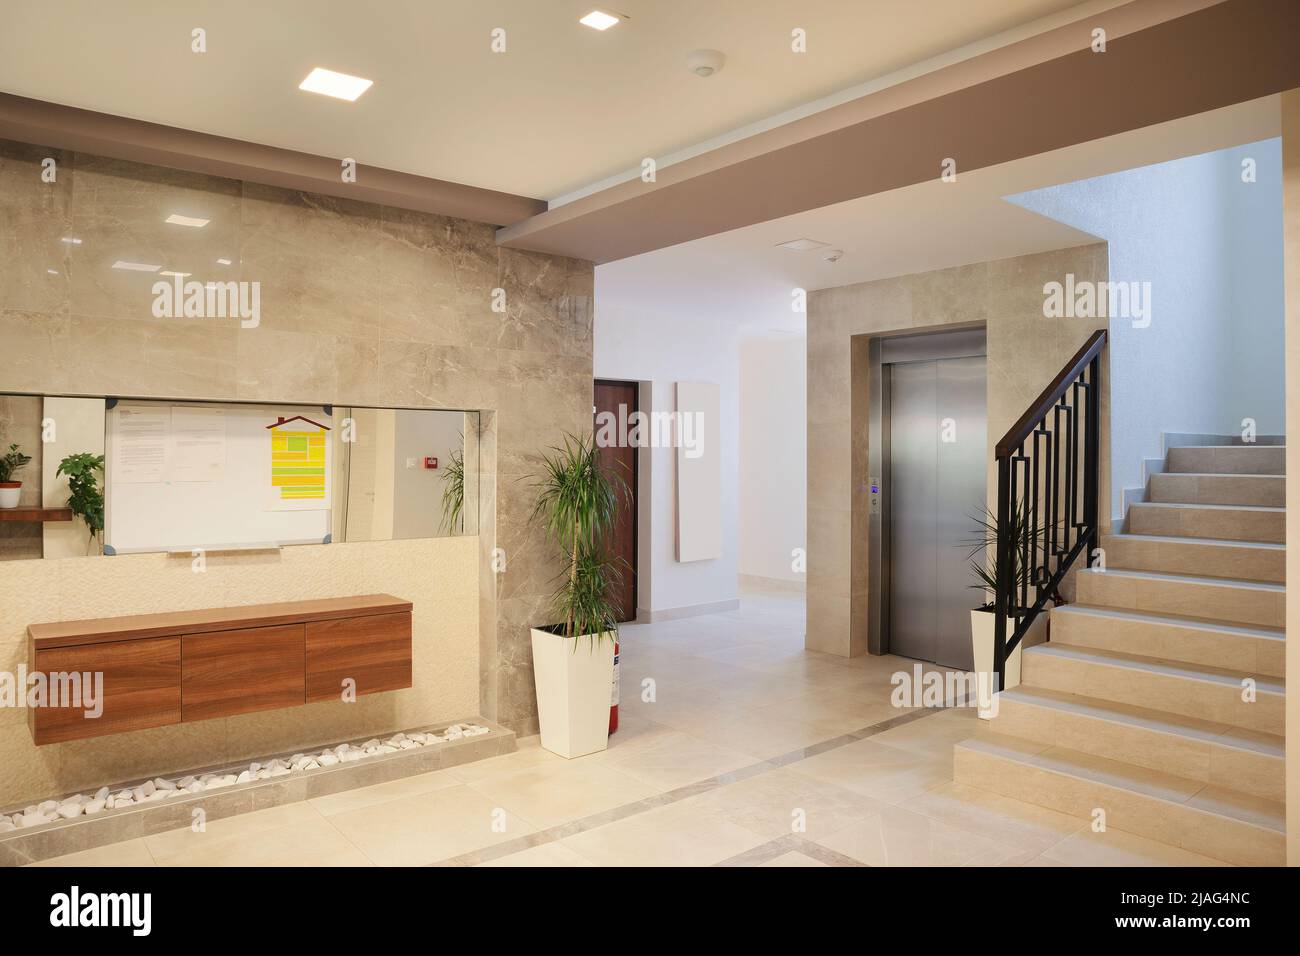 Interior of an entrance hall of a new and modern building. Stock Photo